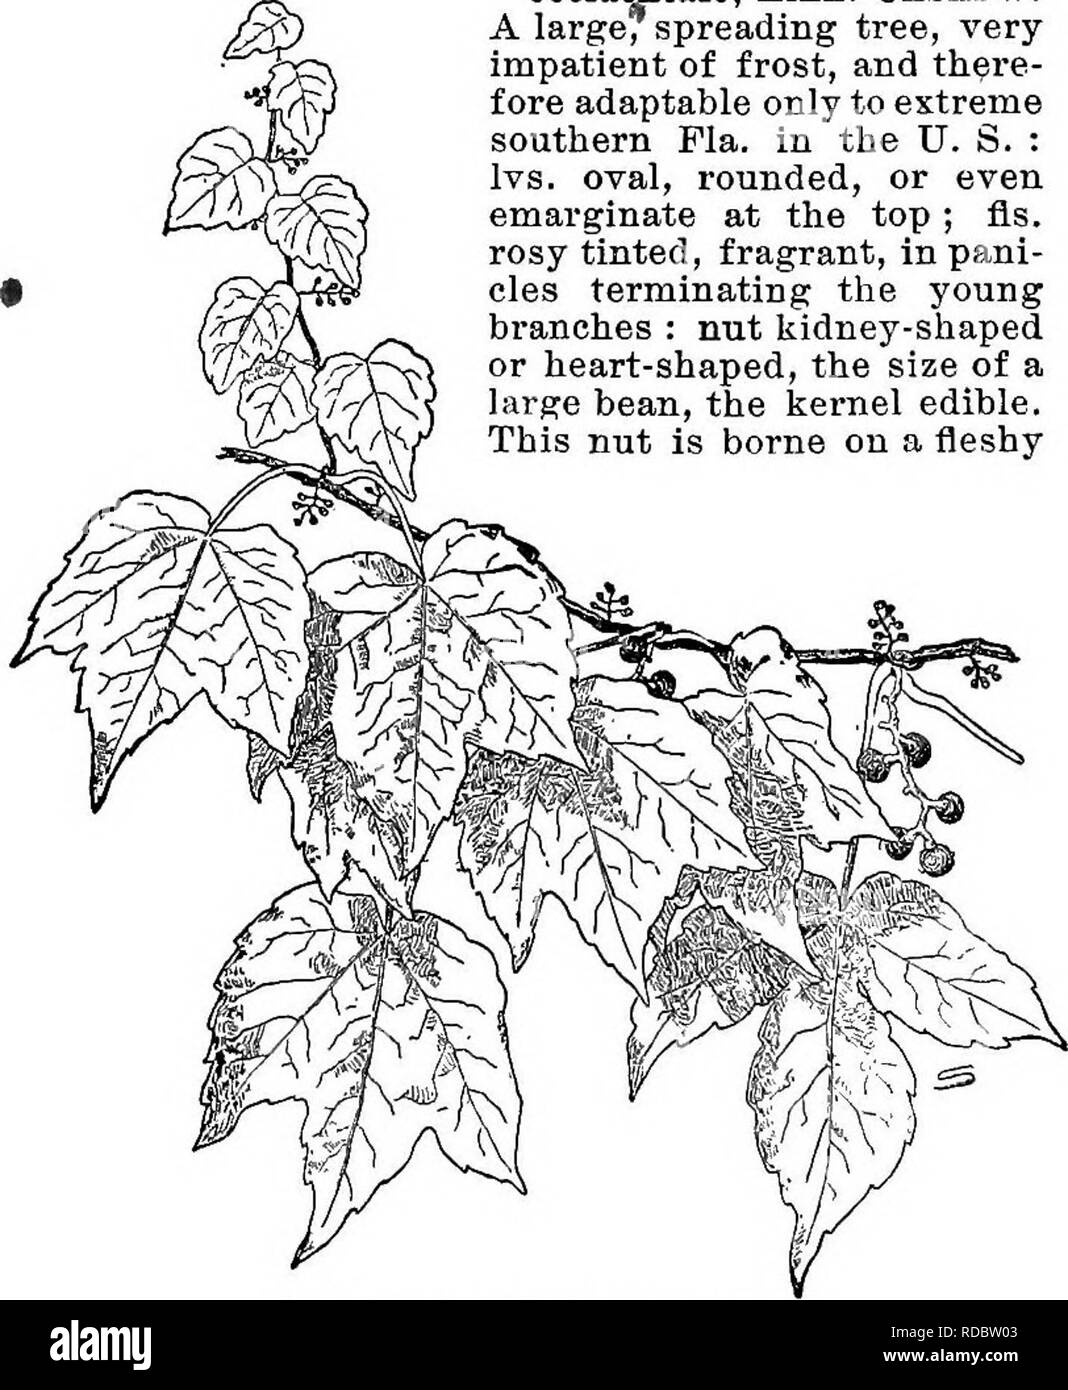 . Cyclopedia of American horticulture, comprising suggestions for cultivation of horticultural plants, descriptions of the species of fruits, vegetables, flowers, and ornamental plants sold in the United States and Canada, together with geographical and biographical sketches. Gardening. 81. Ampelopsis tricuspidata. Showing a yoimg leaf and the disks on the tendrils by which the plant is attached to walls. seijaniseidlia, Bunge. Roots tuberous : lvs. 3-5-parted or digitate, chartaeeous, shining and dark green above, the divisions pinnate, with winged rachis, the pinnse separate from the wings : Stock Photo